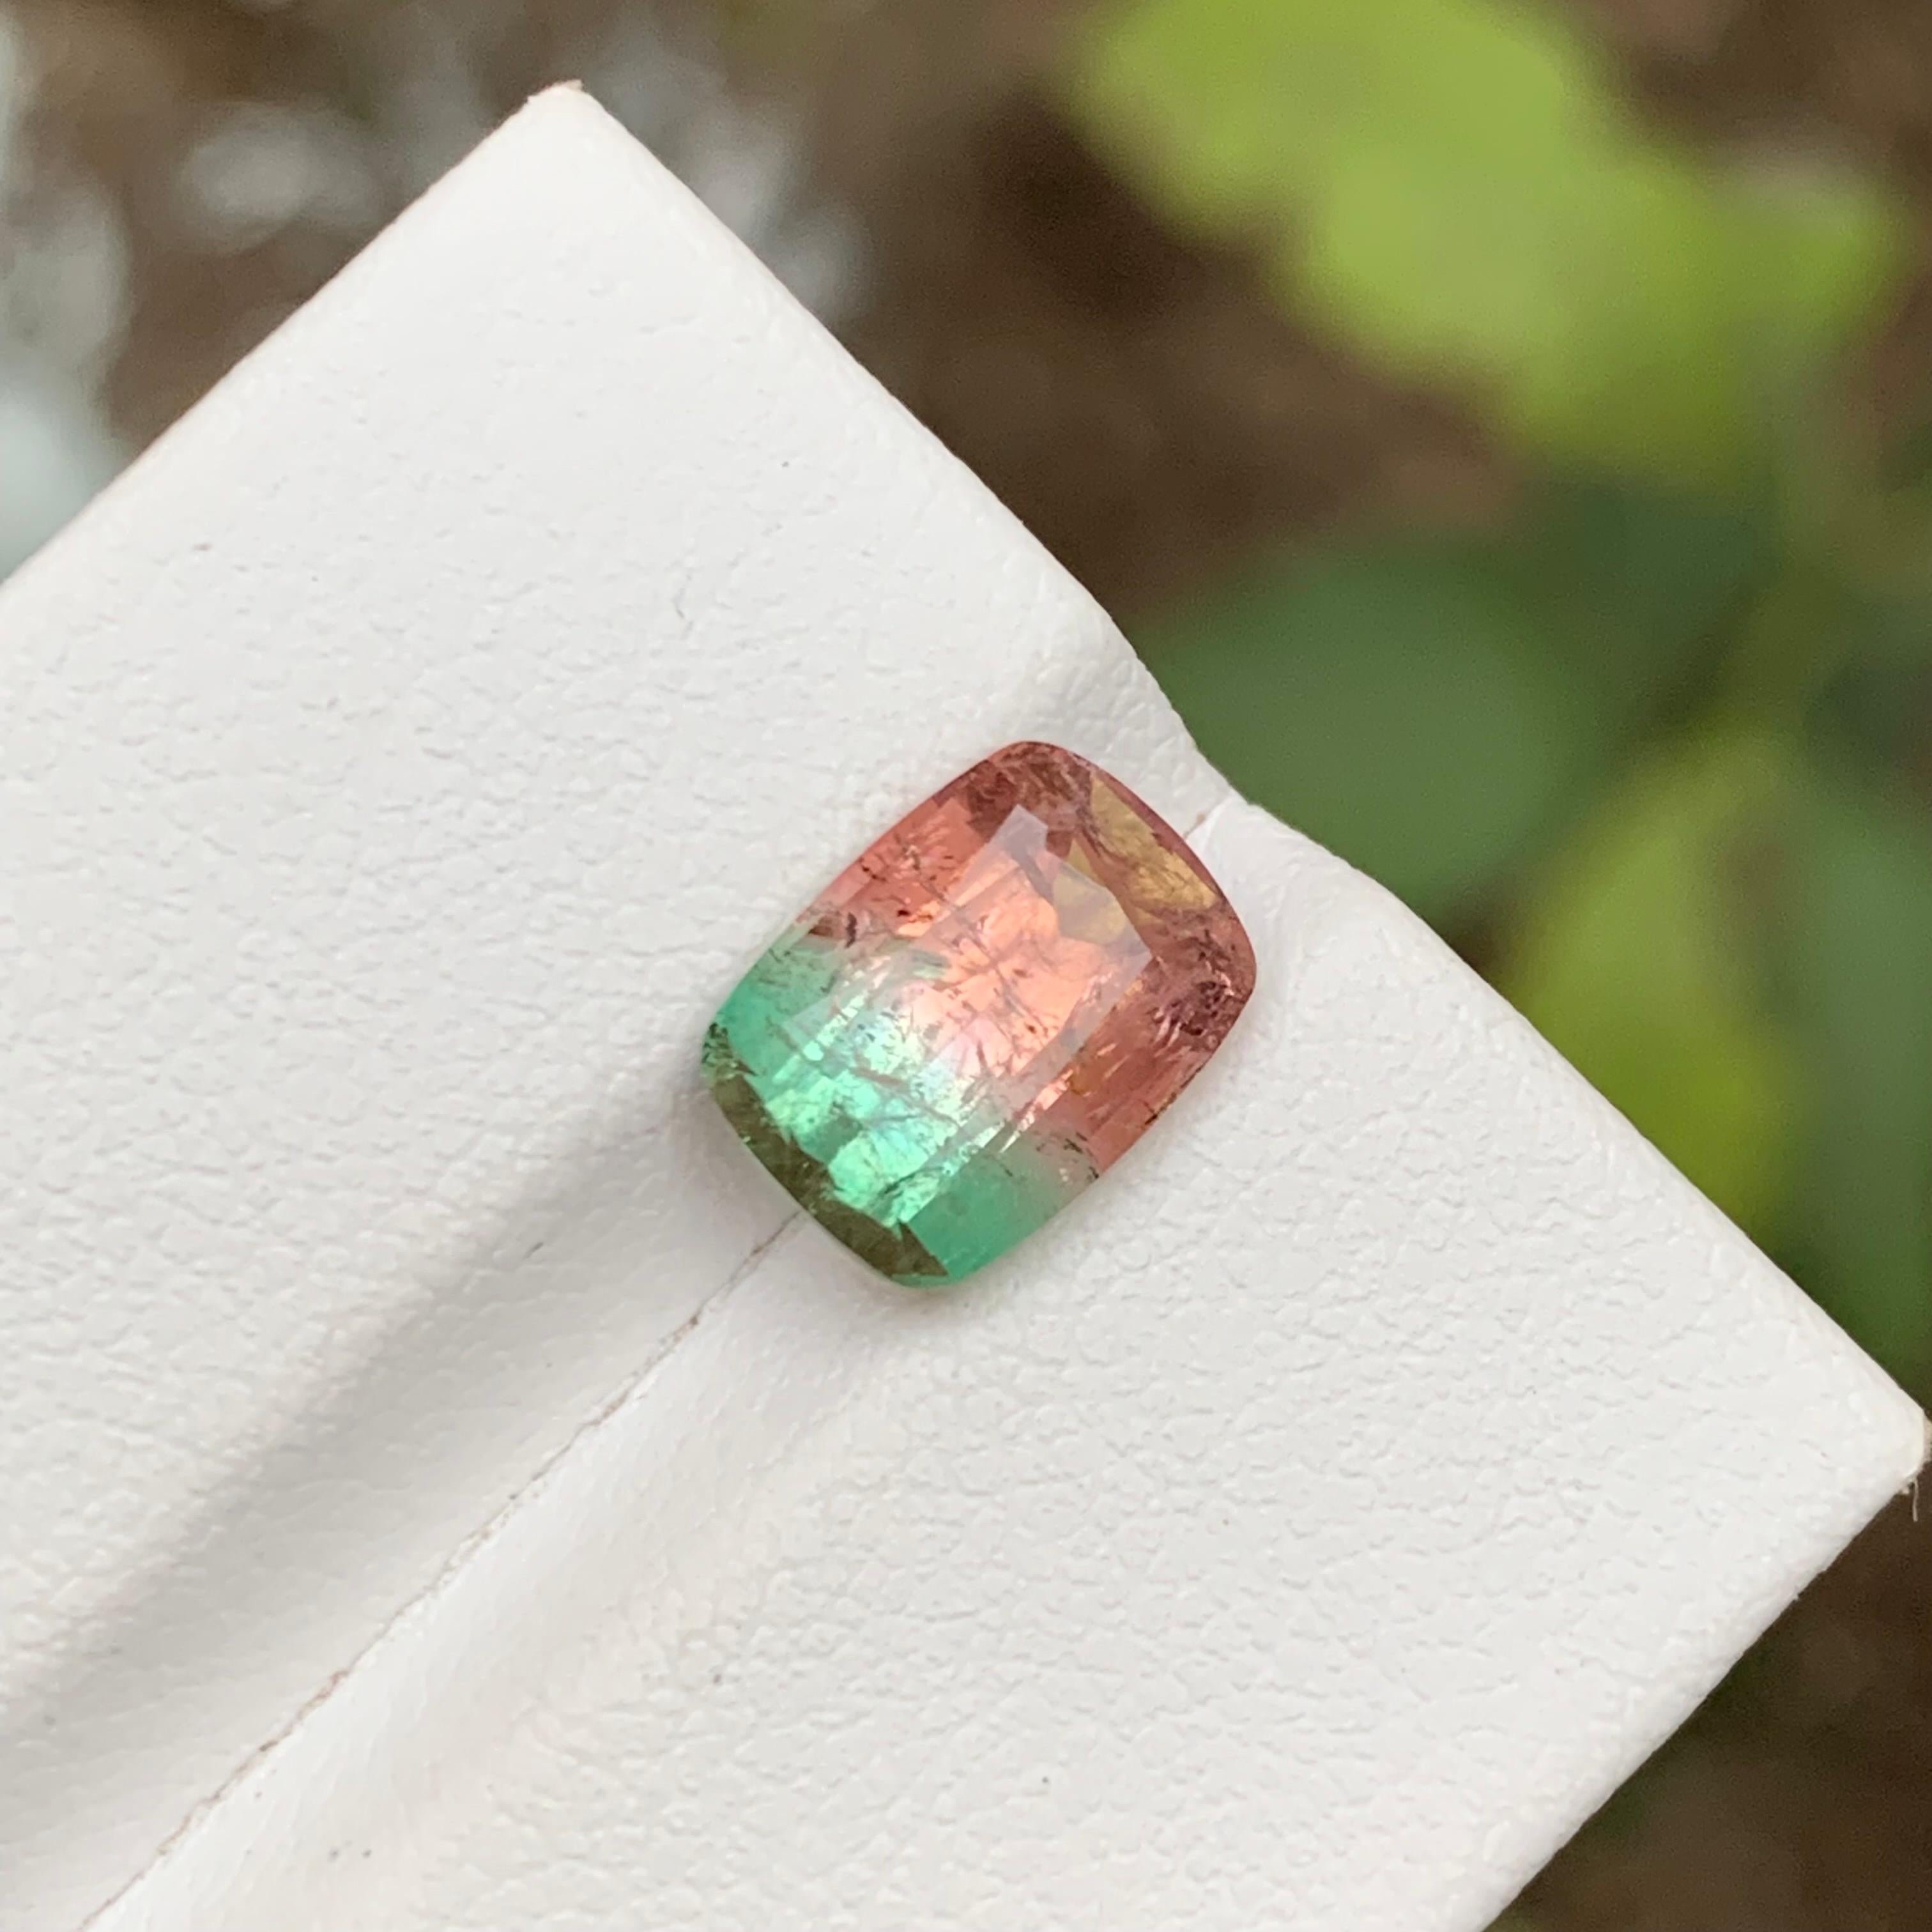 Rare Watermelon Bicolor Tourmaline Gemstone 3.05Ct Cushion Cut for Ring/Jewelry  For Sale 3